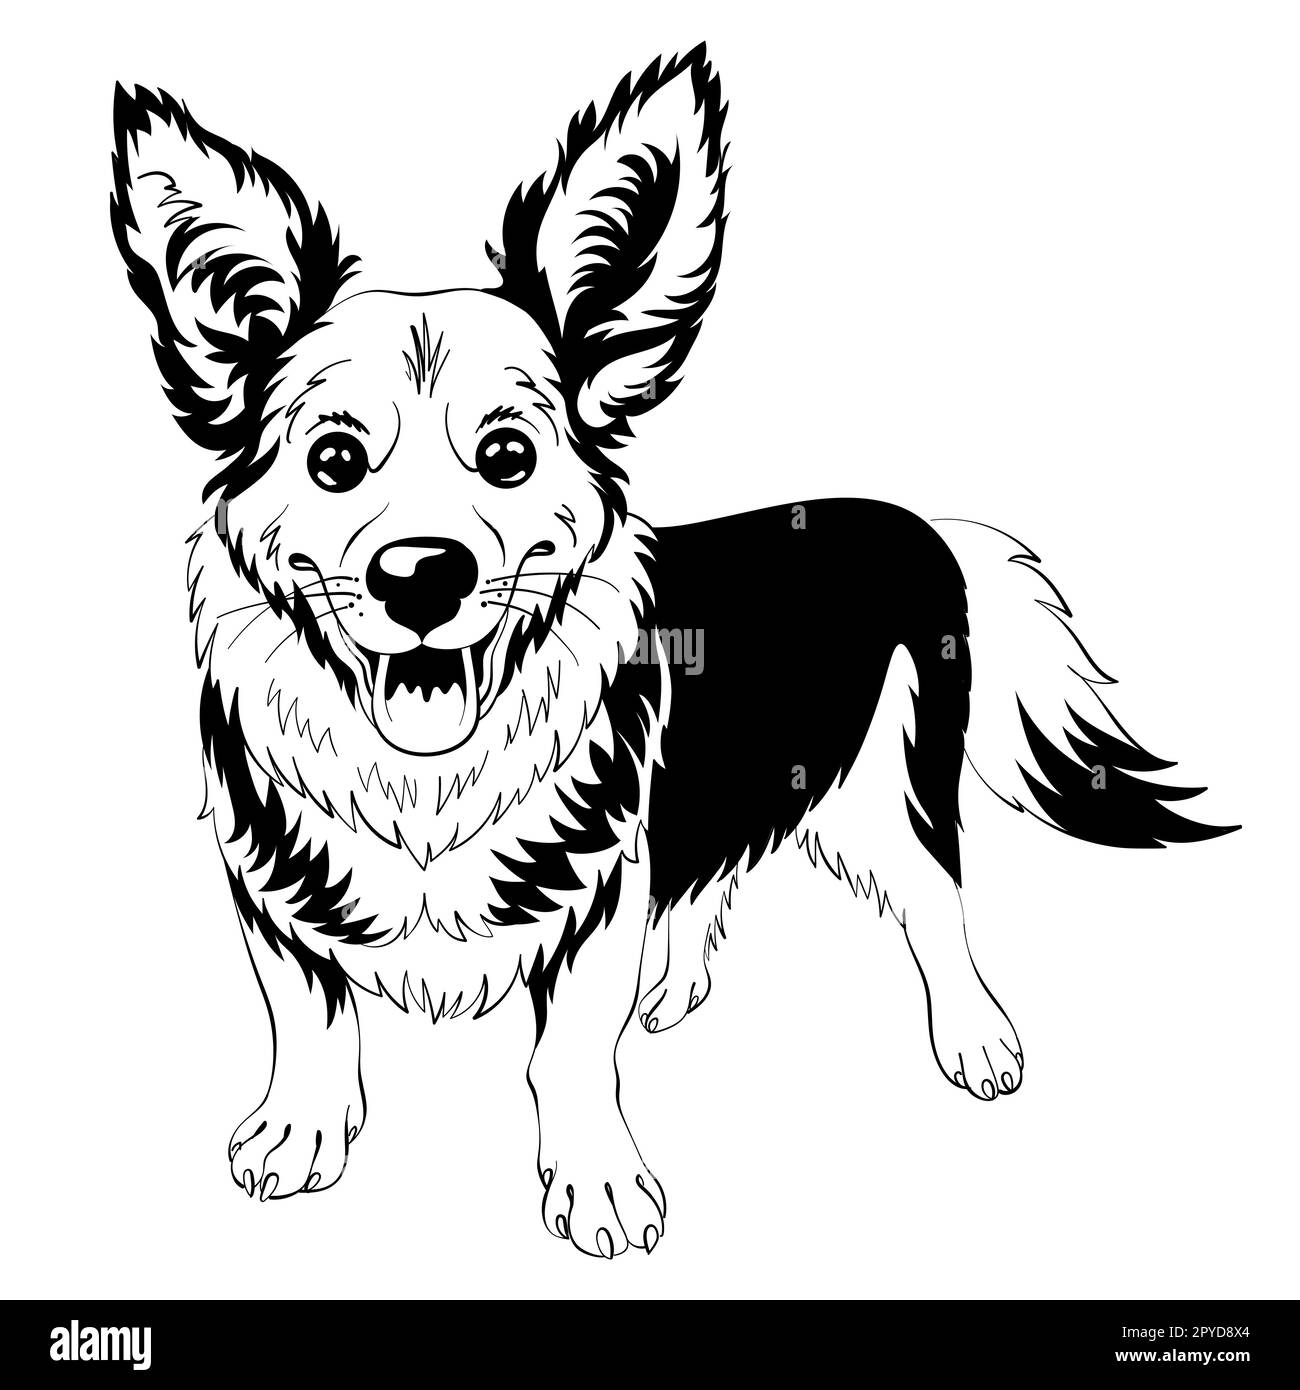 Black and white sketch of dog Welsh Corgi breed staying and smiling Stock Photo